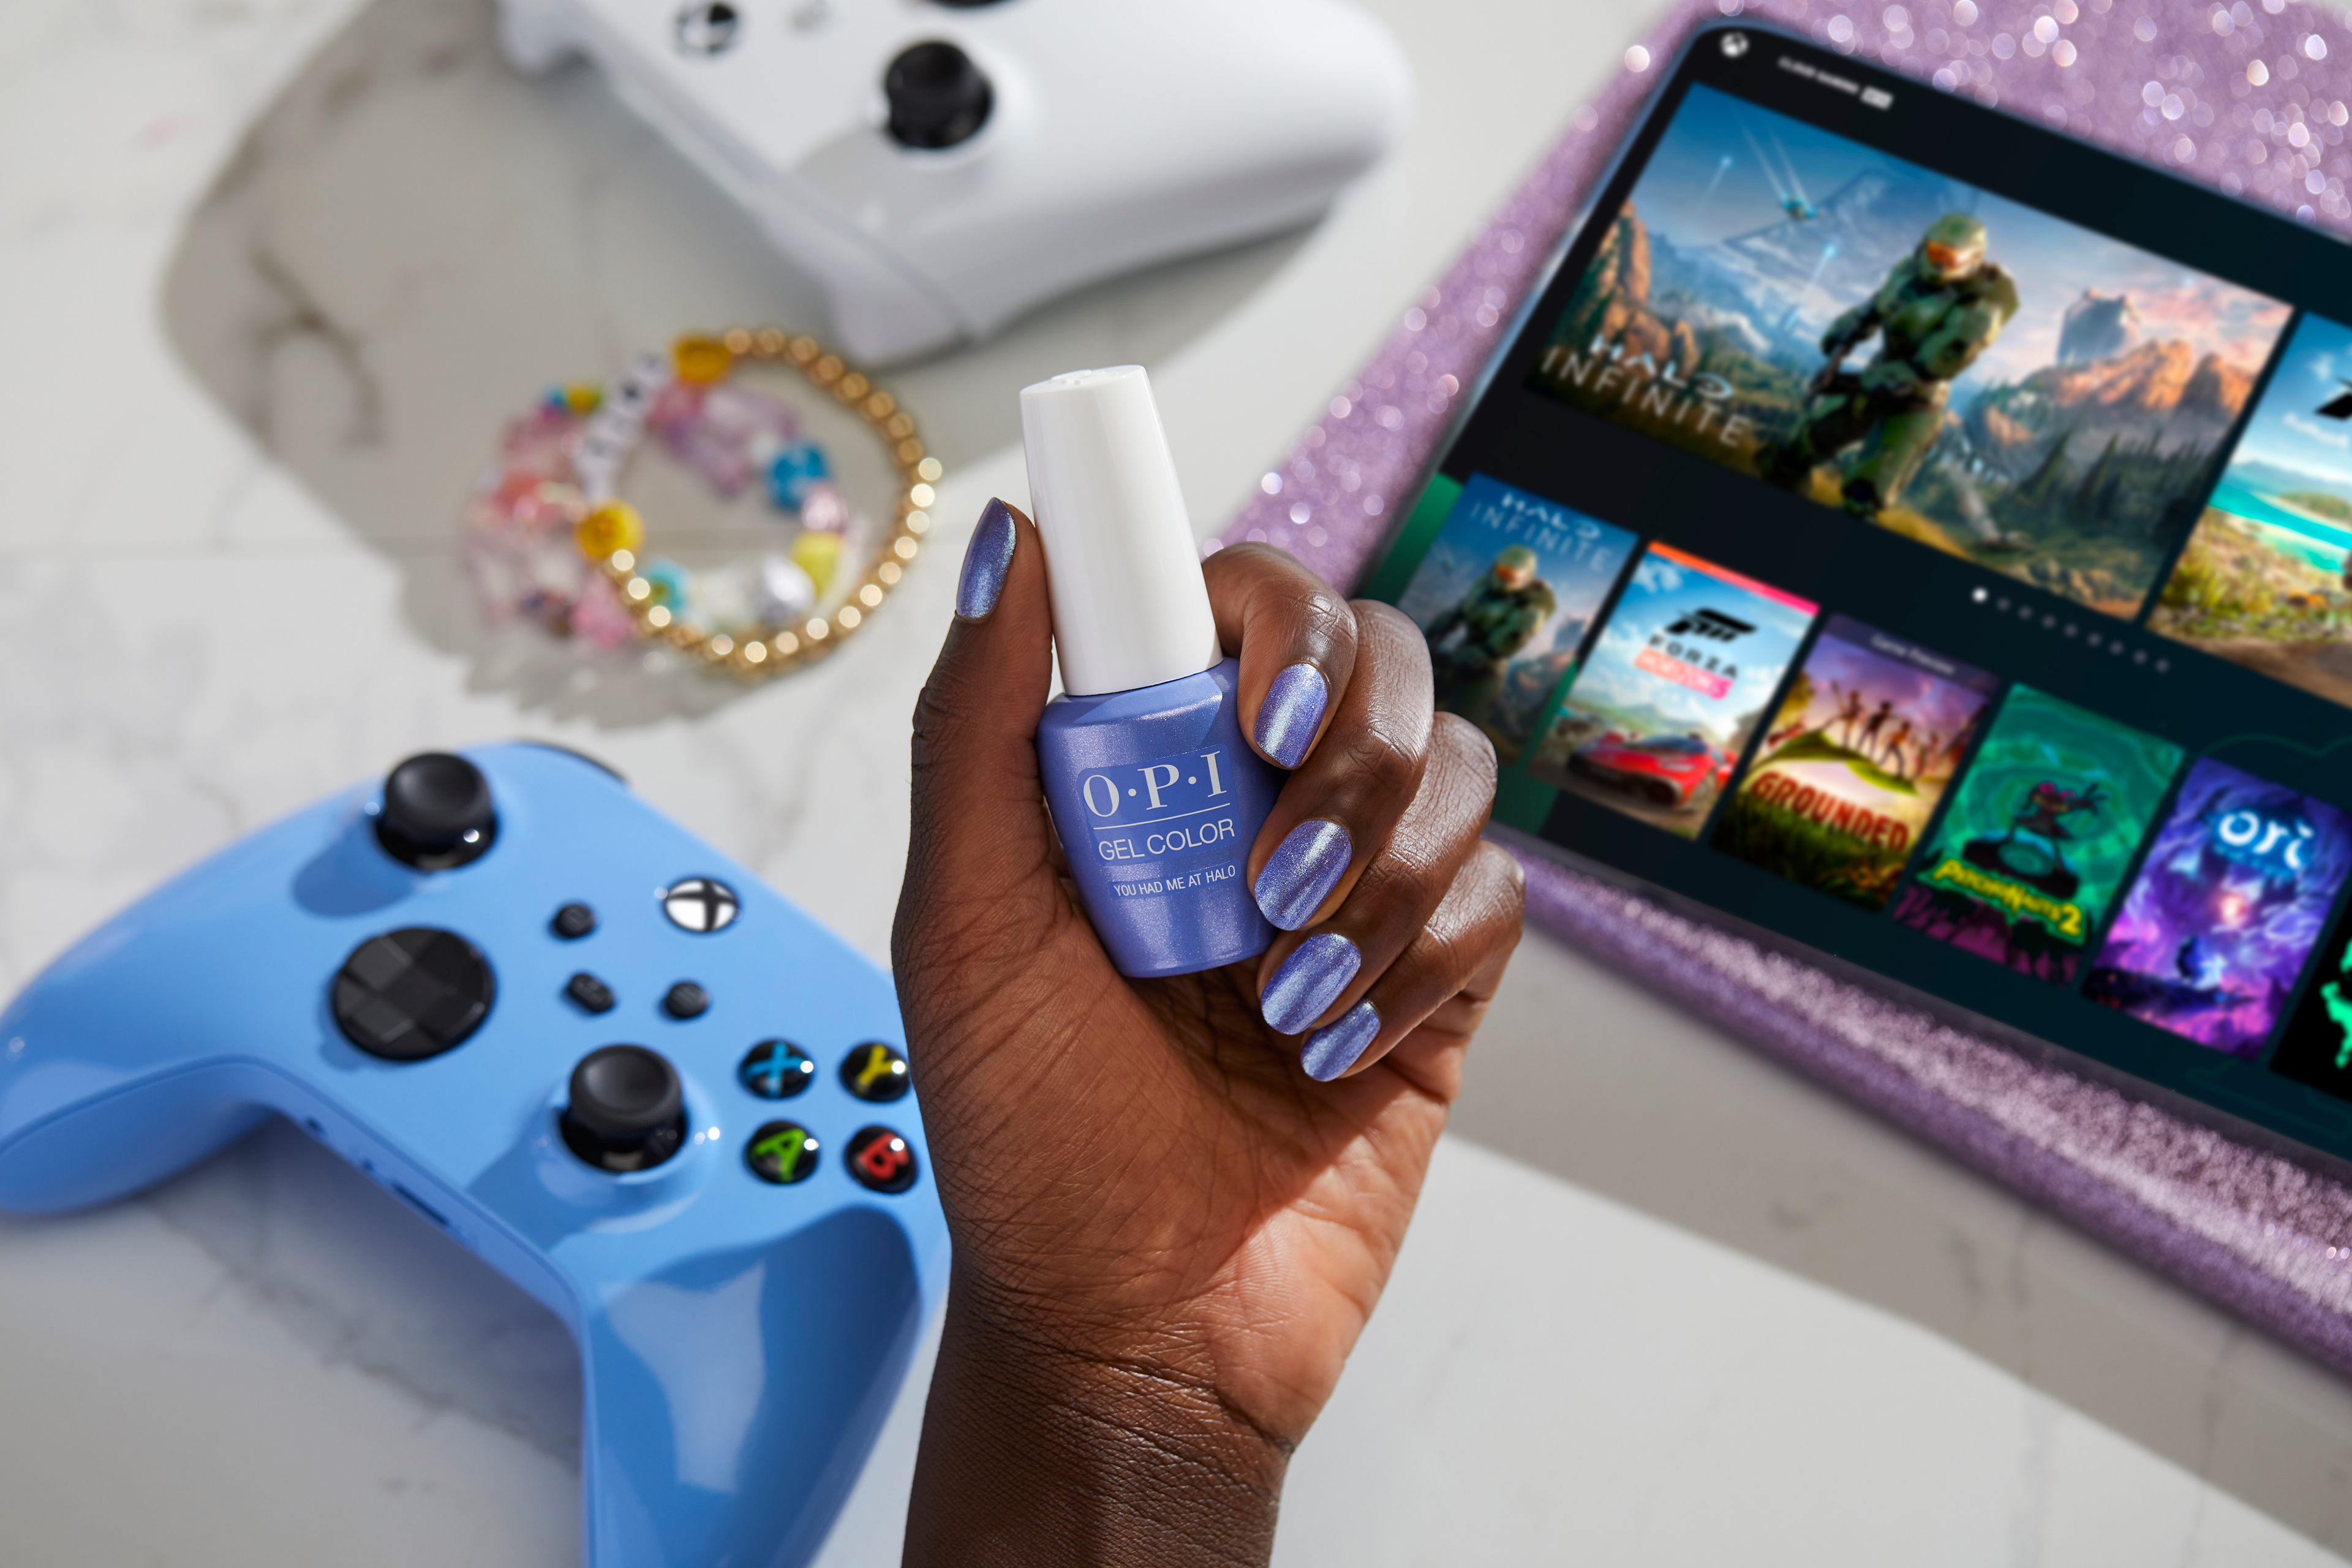 a brown-skinned hand holding up a bottle of metallic periwinkle nail polish with a label saying “You Had Me at Halo,” with a blue Xbox controller in the background